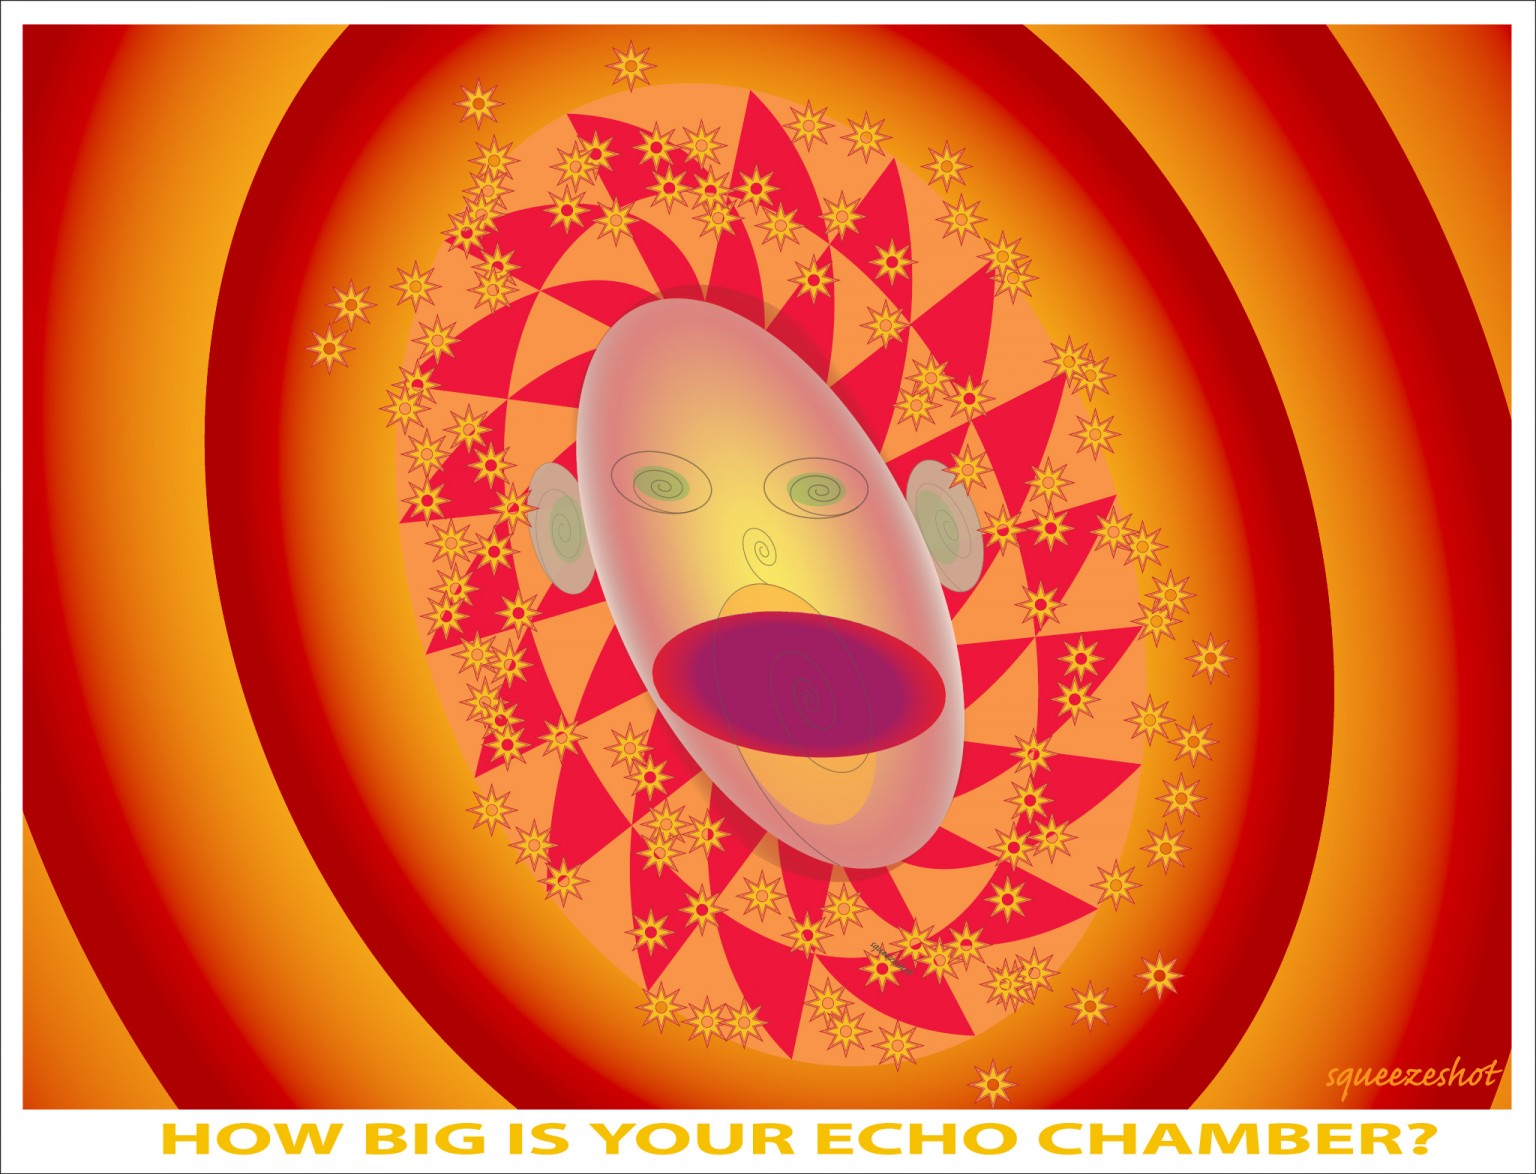 how big is your echo chamber?